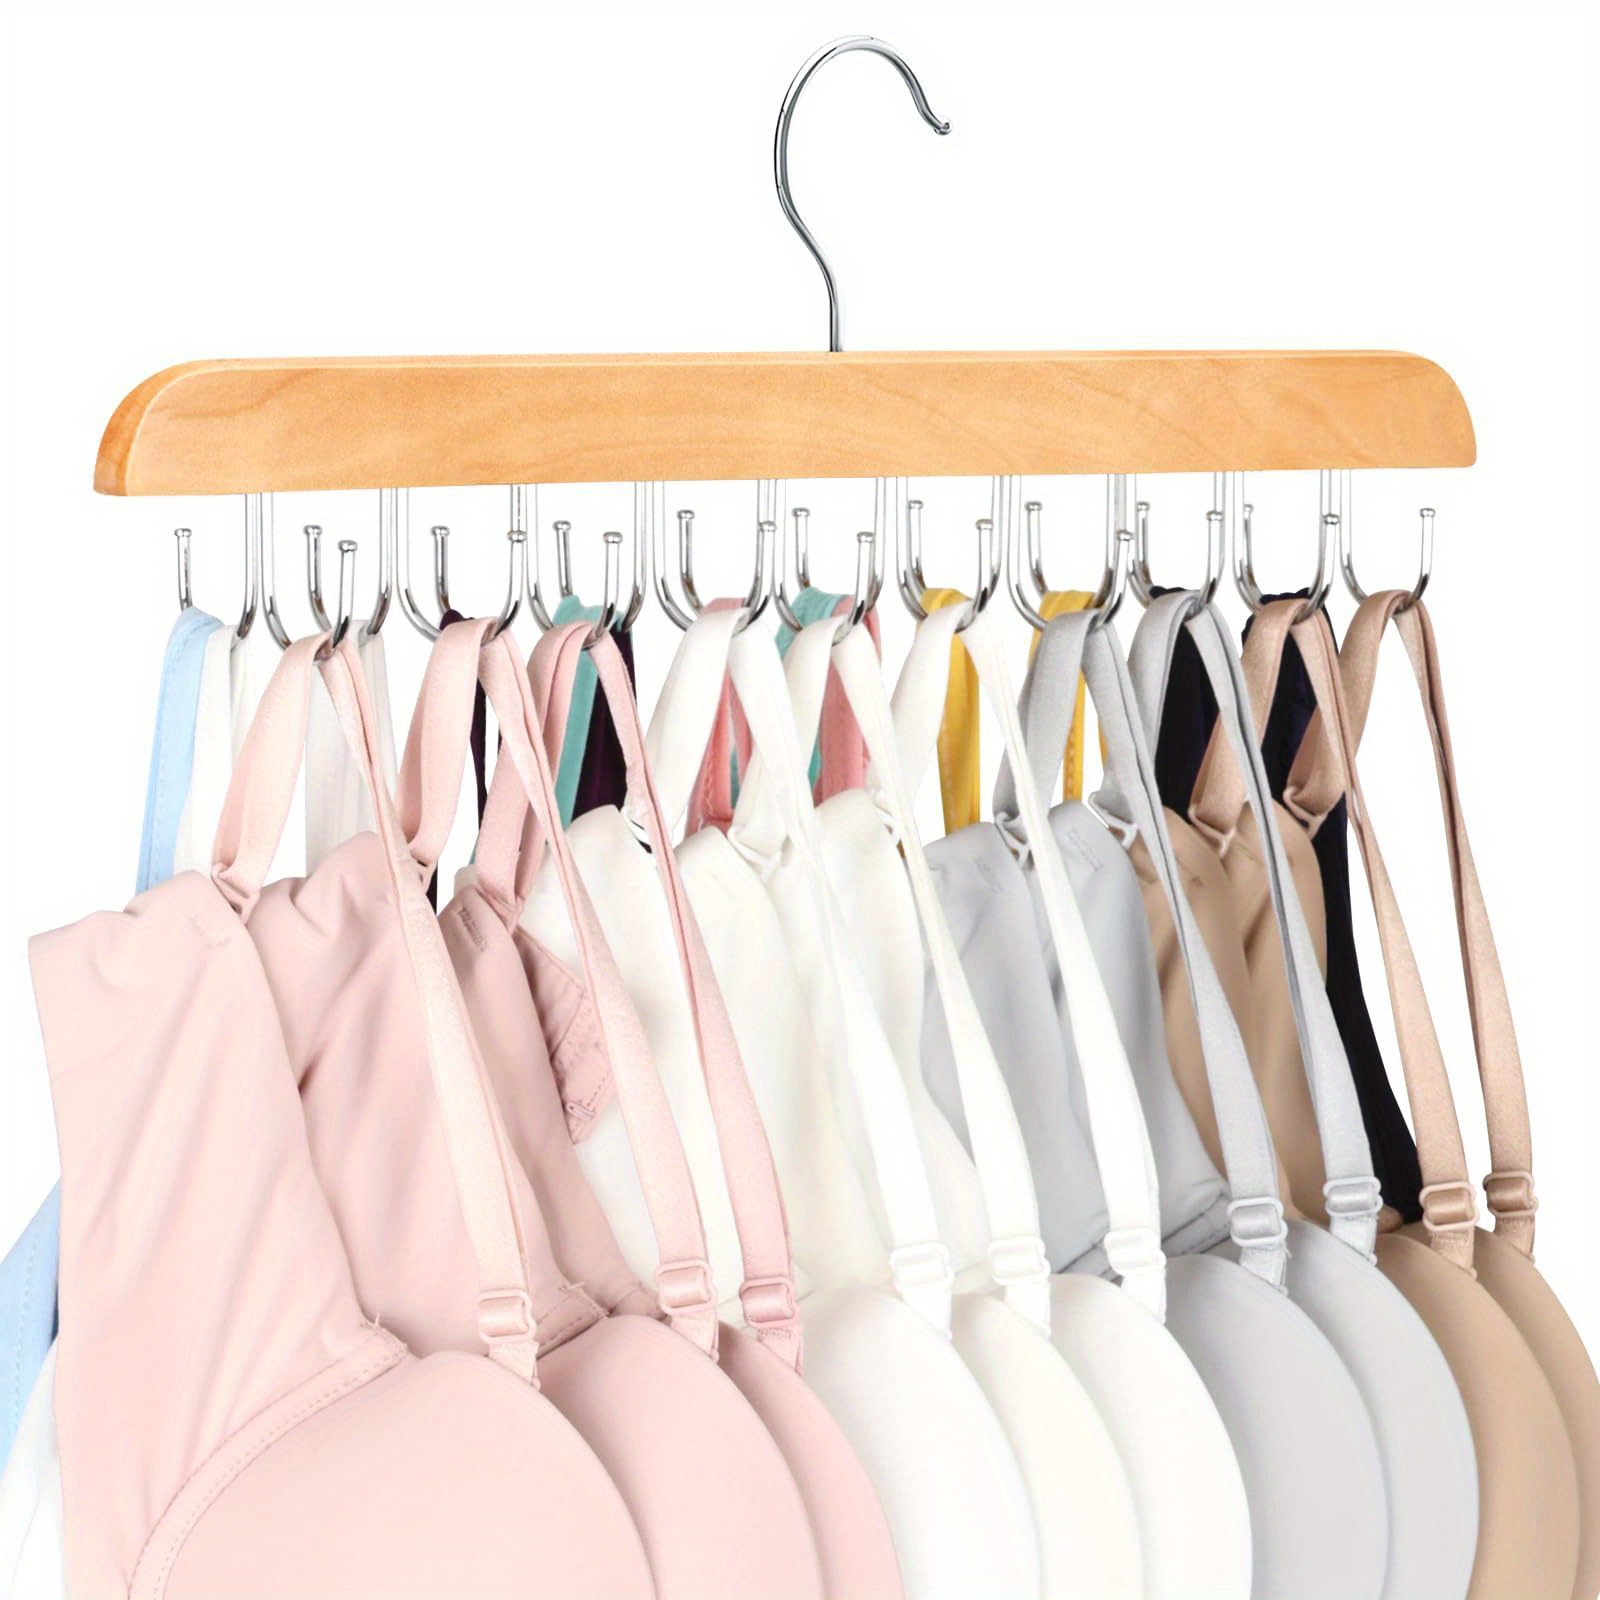 

1pc 20-hook Wooden Hat Hanger, Clothes Drying Rack For Underwear, Ties, Camisoles, Scarves, Belts, Household Storage Organizer For Bathroom, Bedroom, Closet, Wardrobe, Home, Dorm